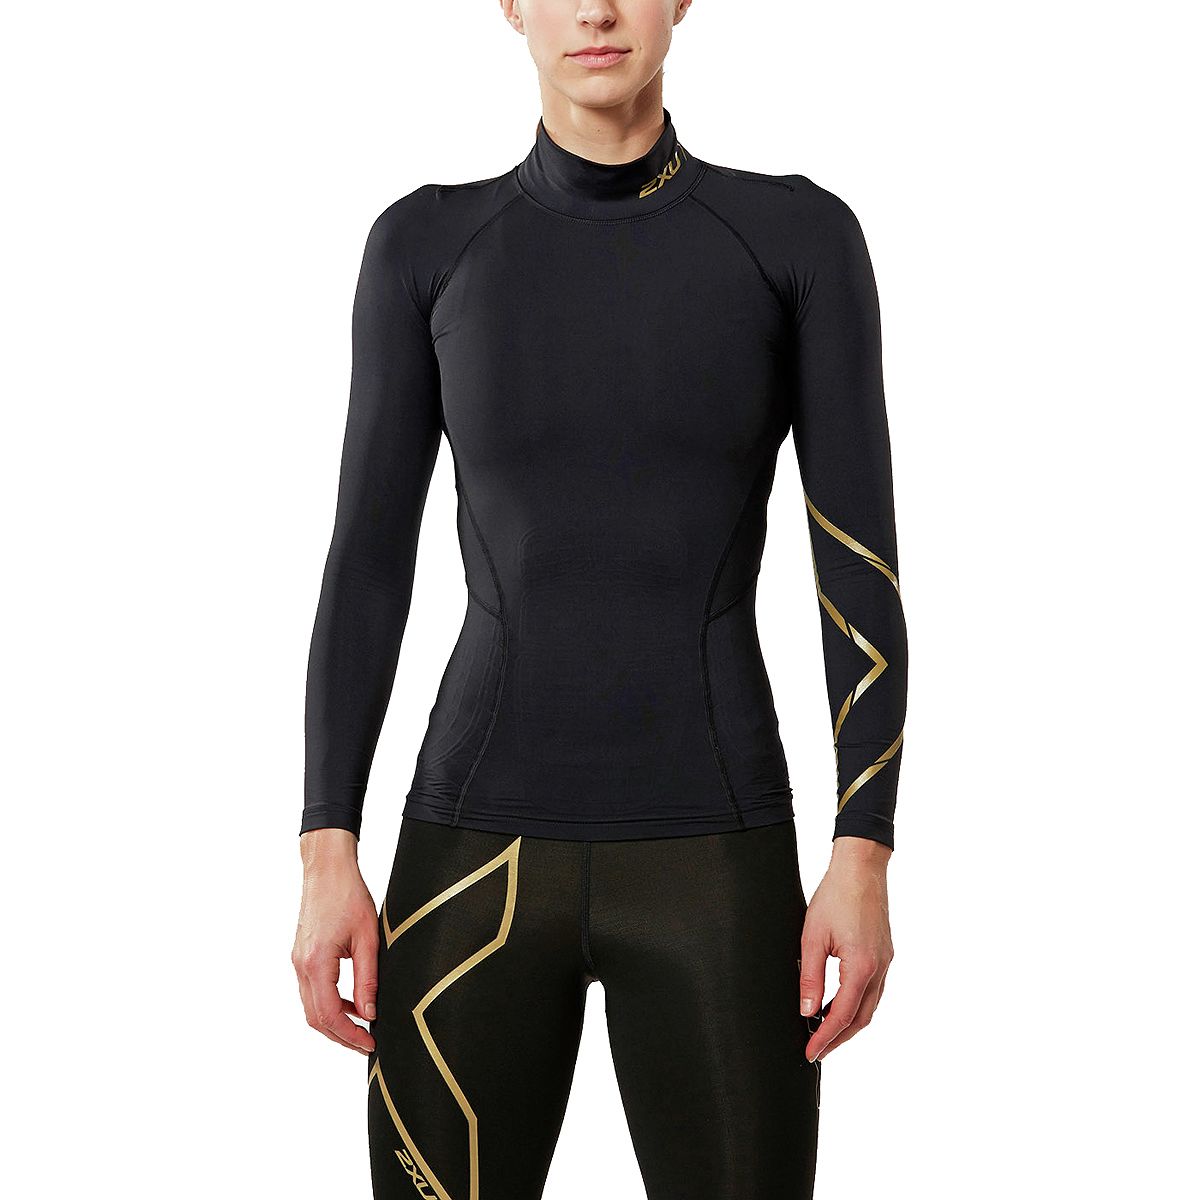 2XU MCS Thermal Compression Long-Sleeve Top - Women's